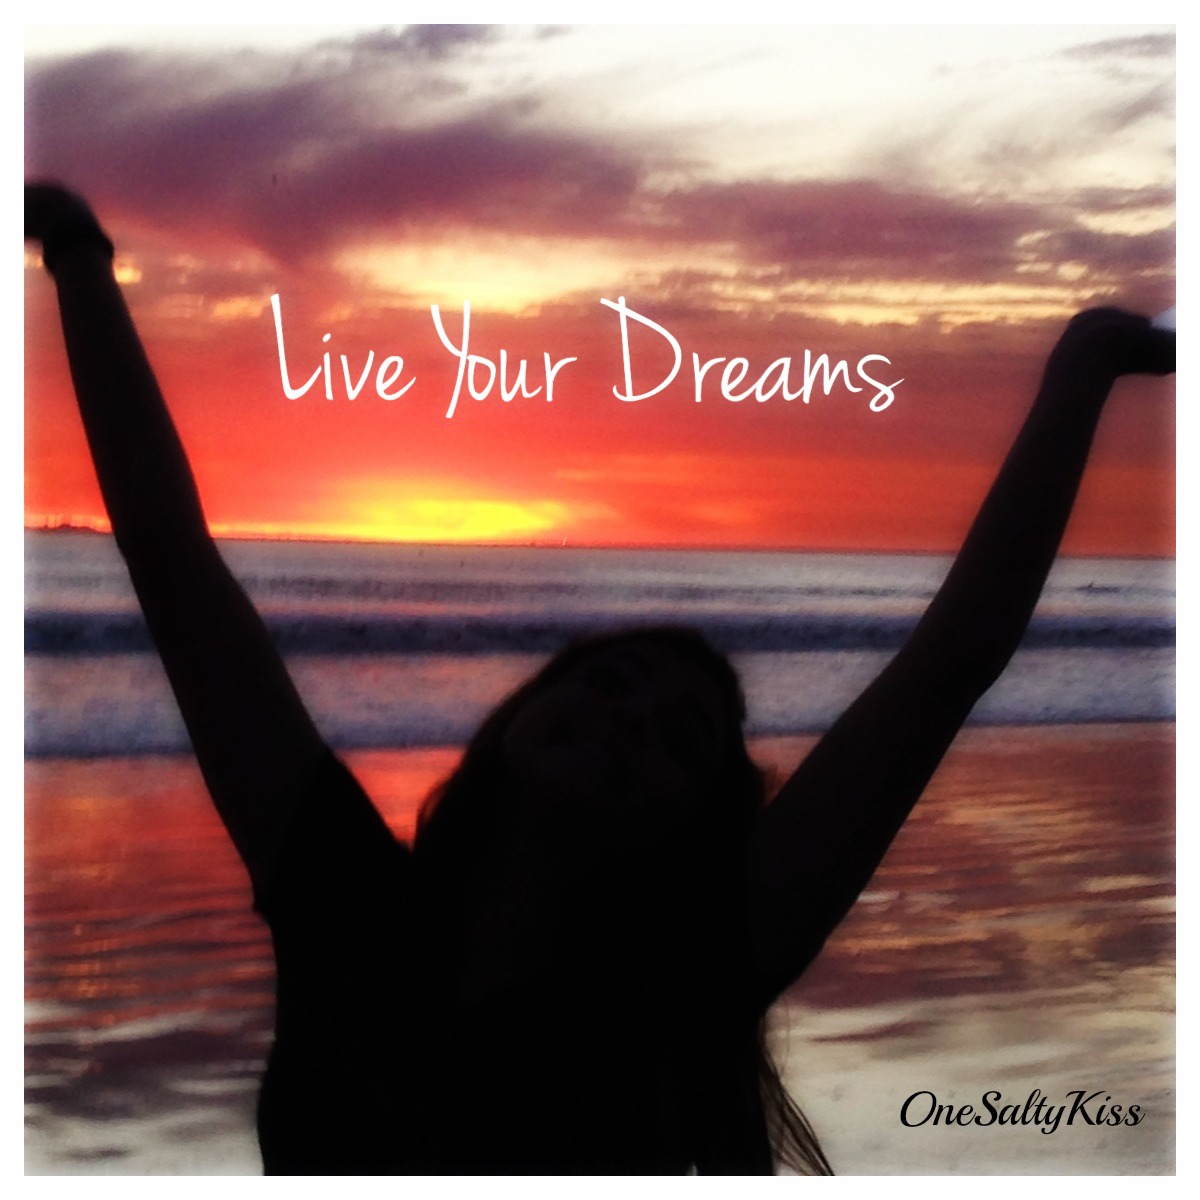 Are You Ready To Live Your Dreams In The New Year?